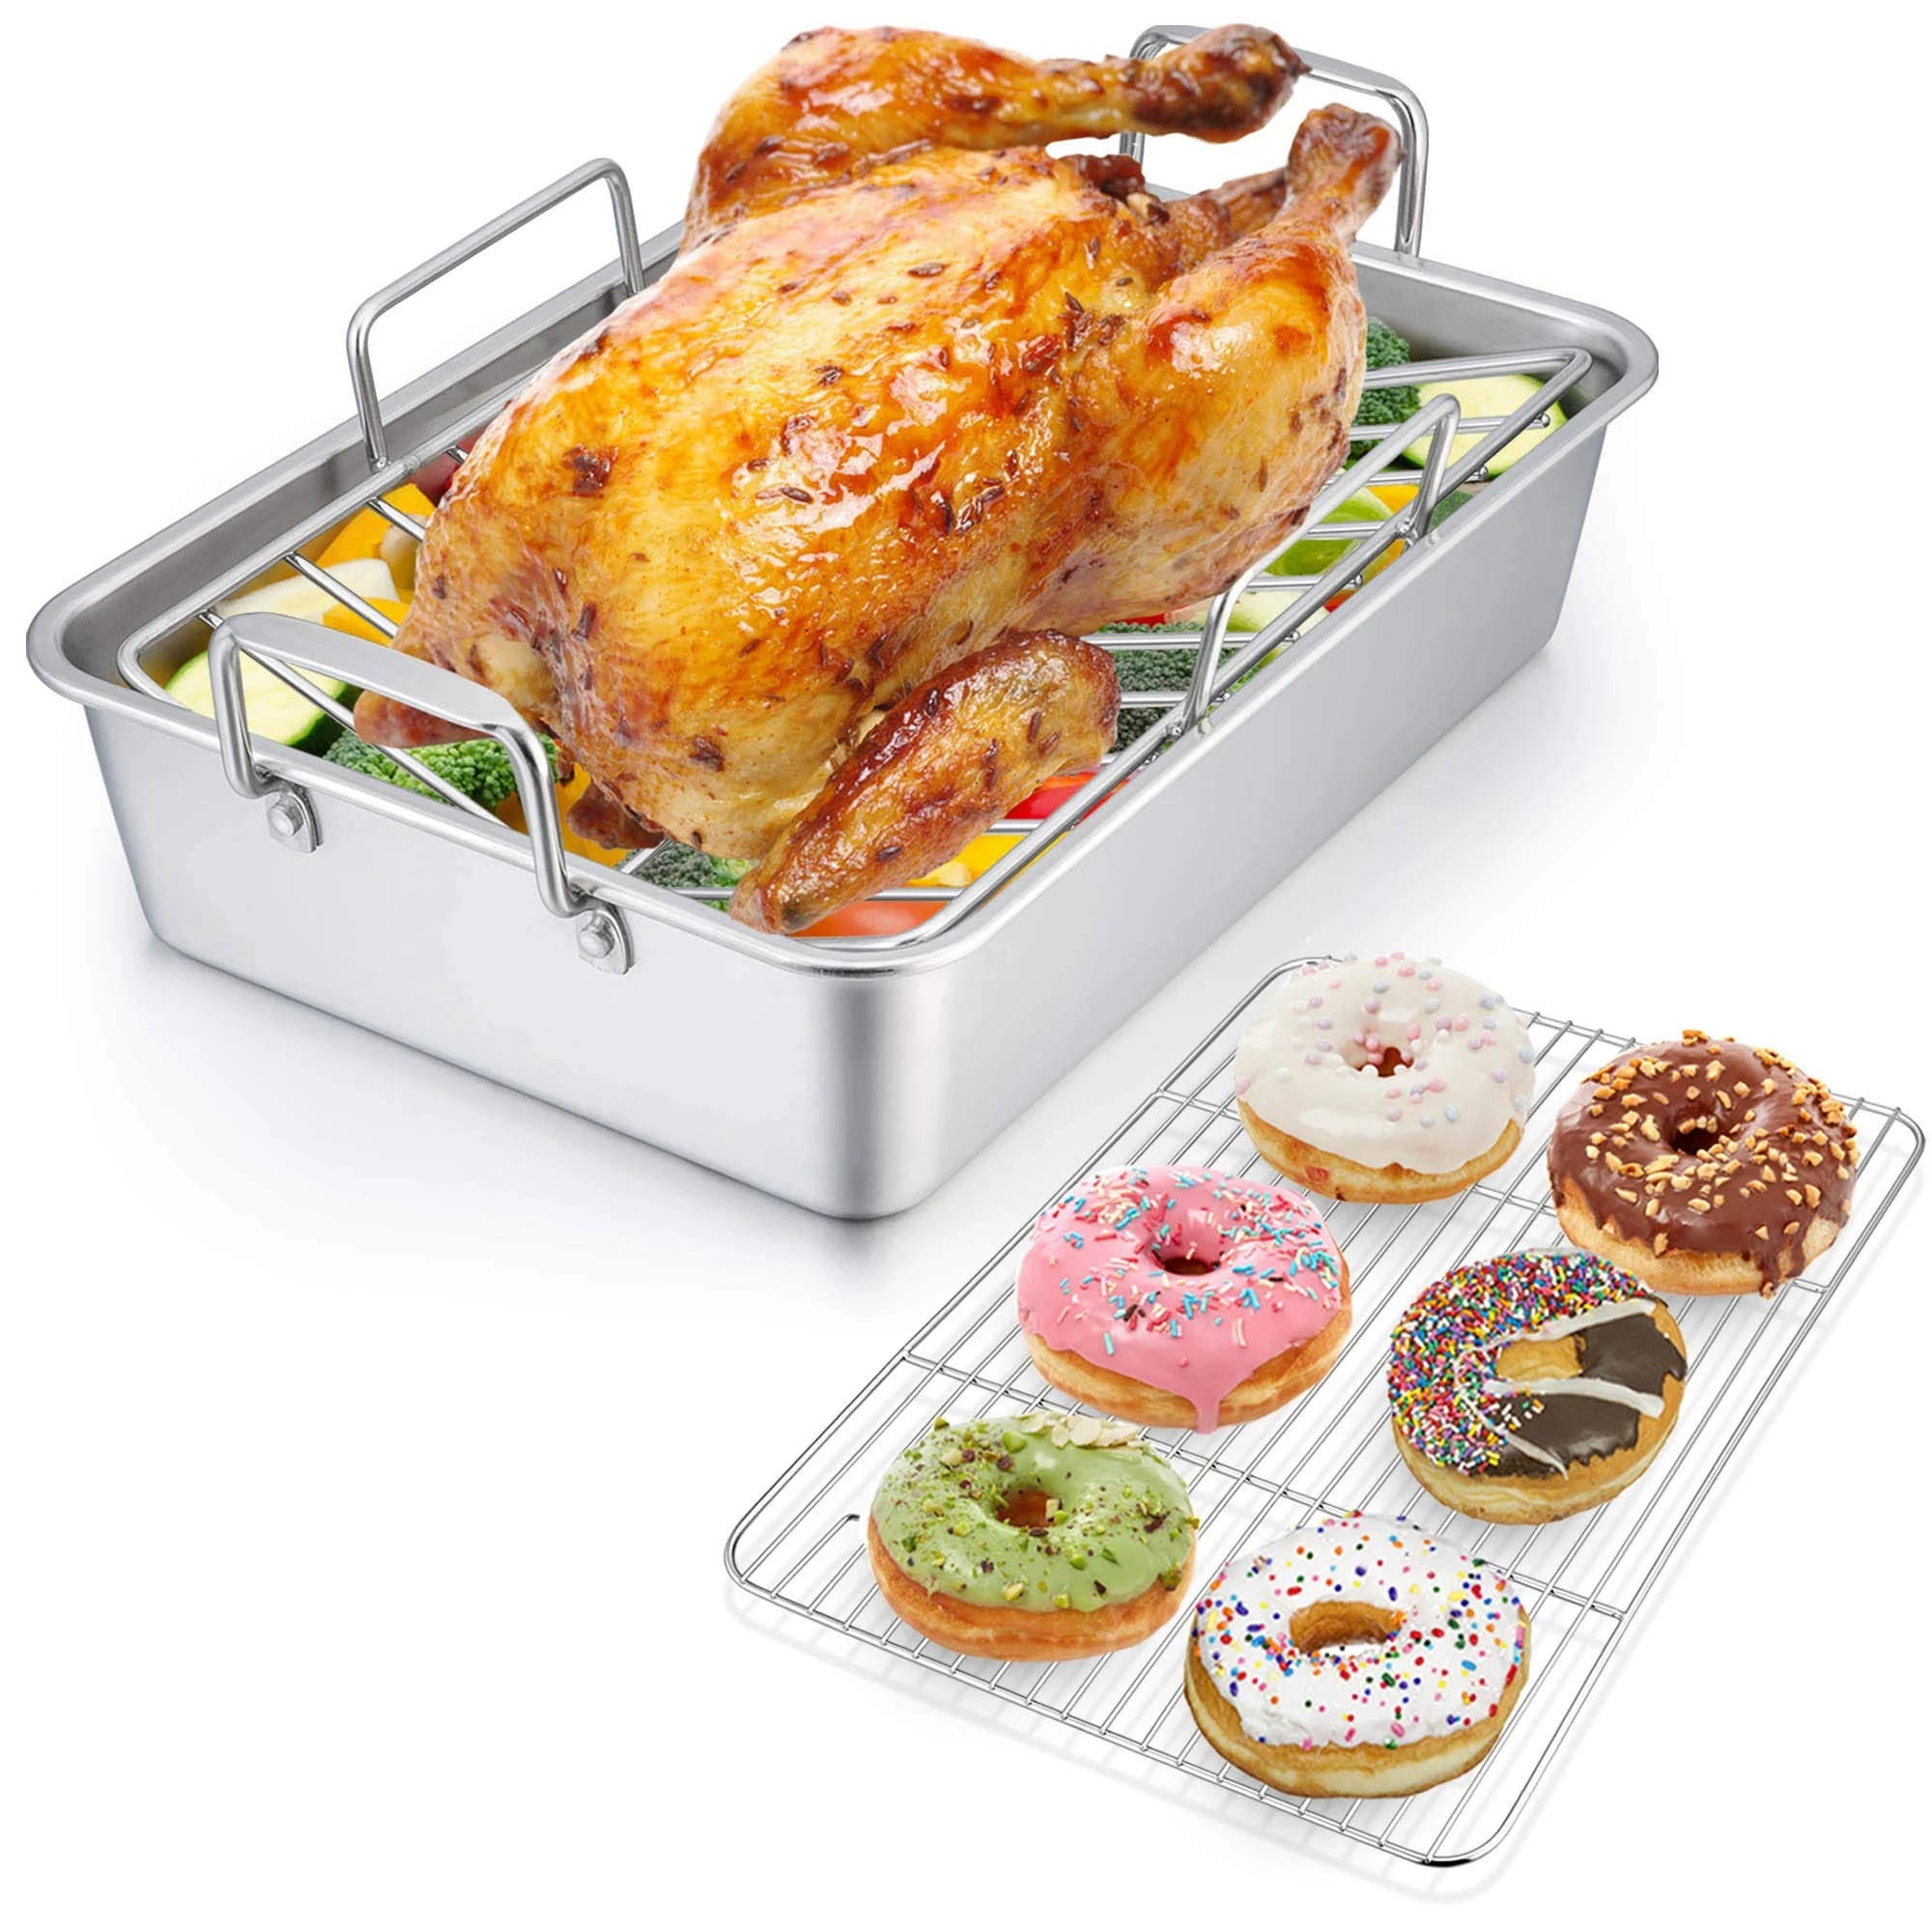 Stainless Steel Non-Toxic Lasagna Pan with Racks | Image